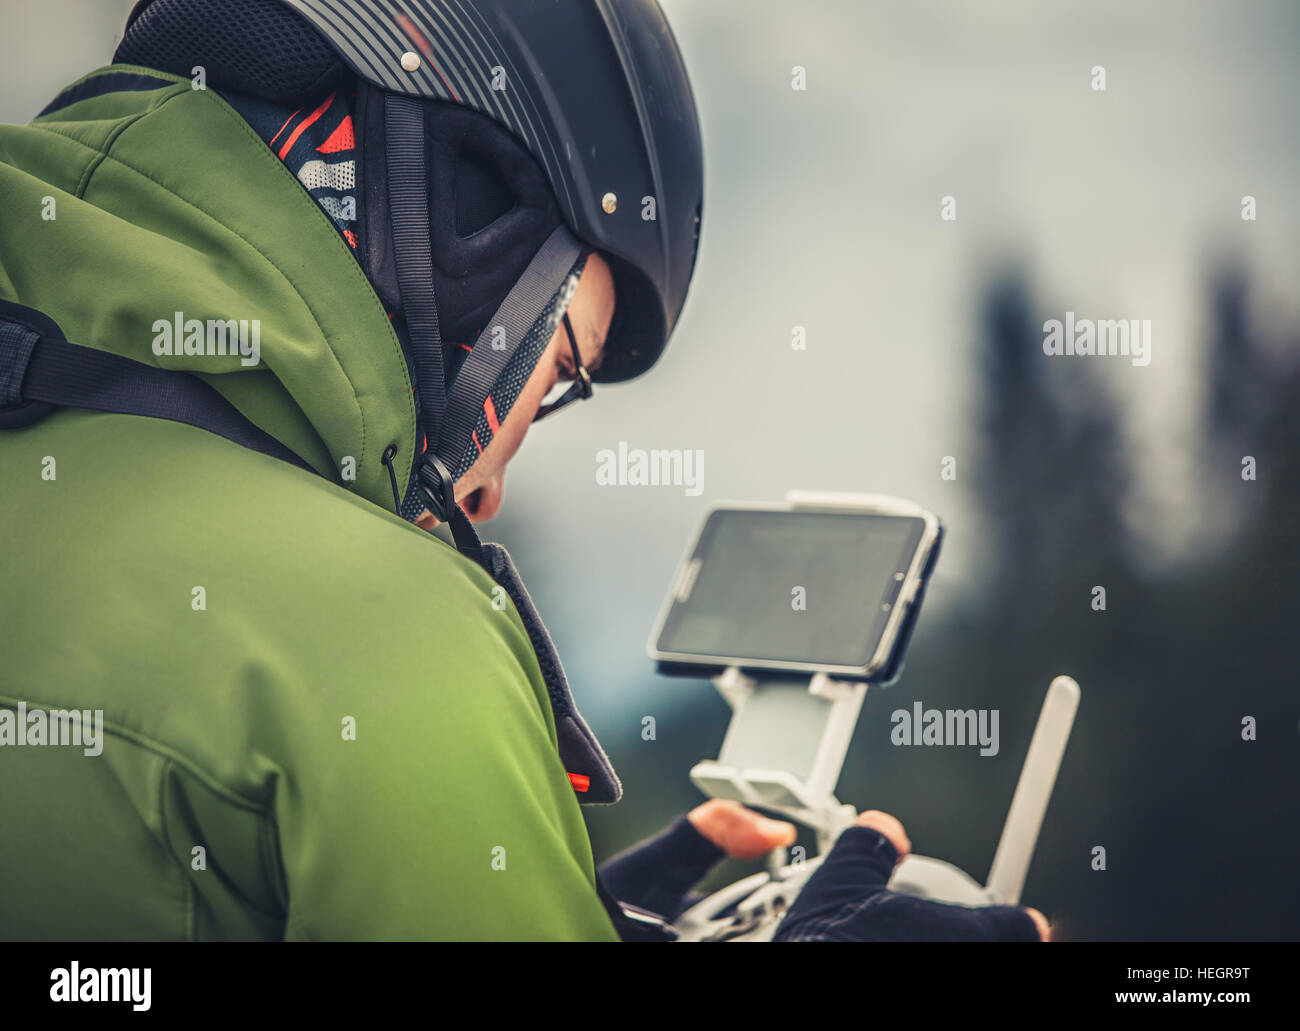 Man operating a drone Stock Photo